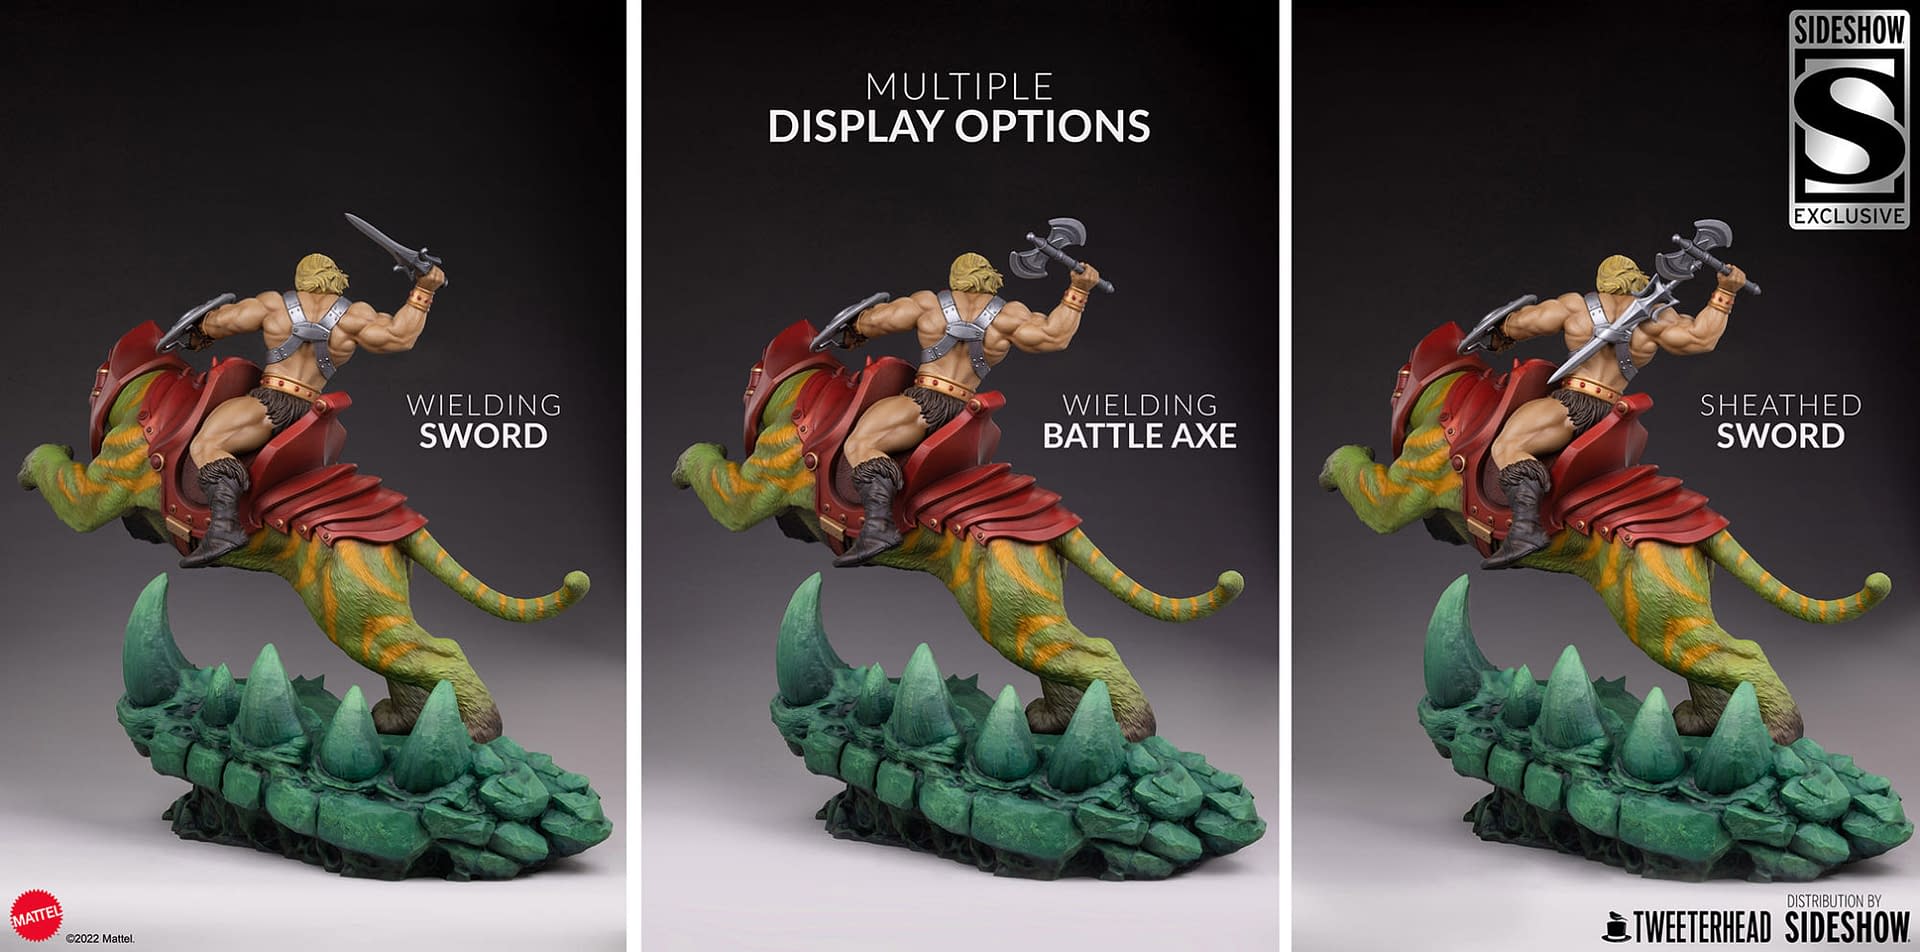 He-Man and Battle Cat Classic Deluxe Statue Revealed by Tweeterhead